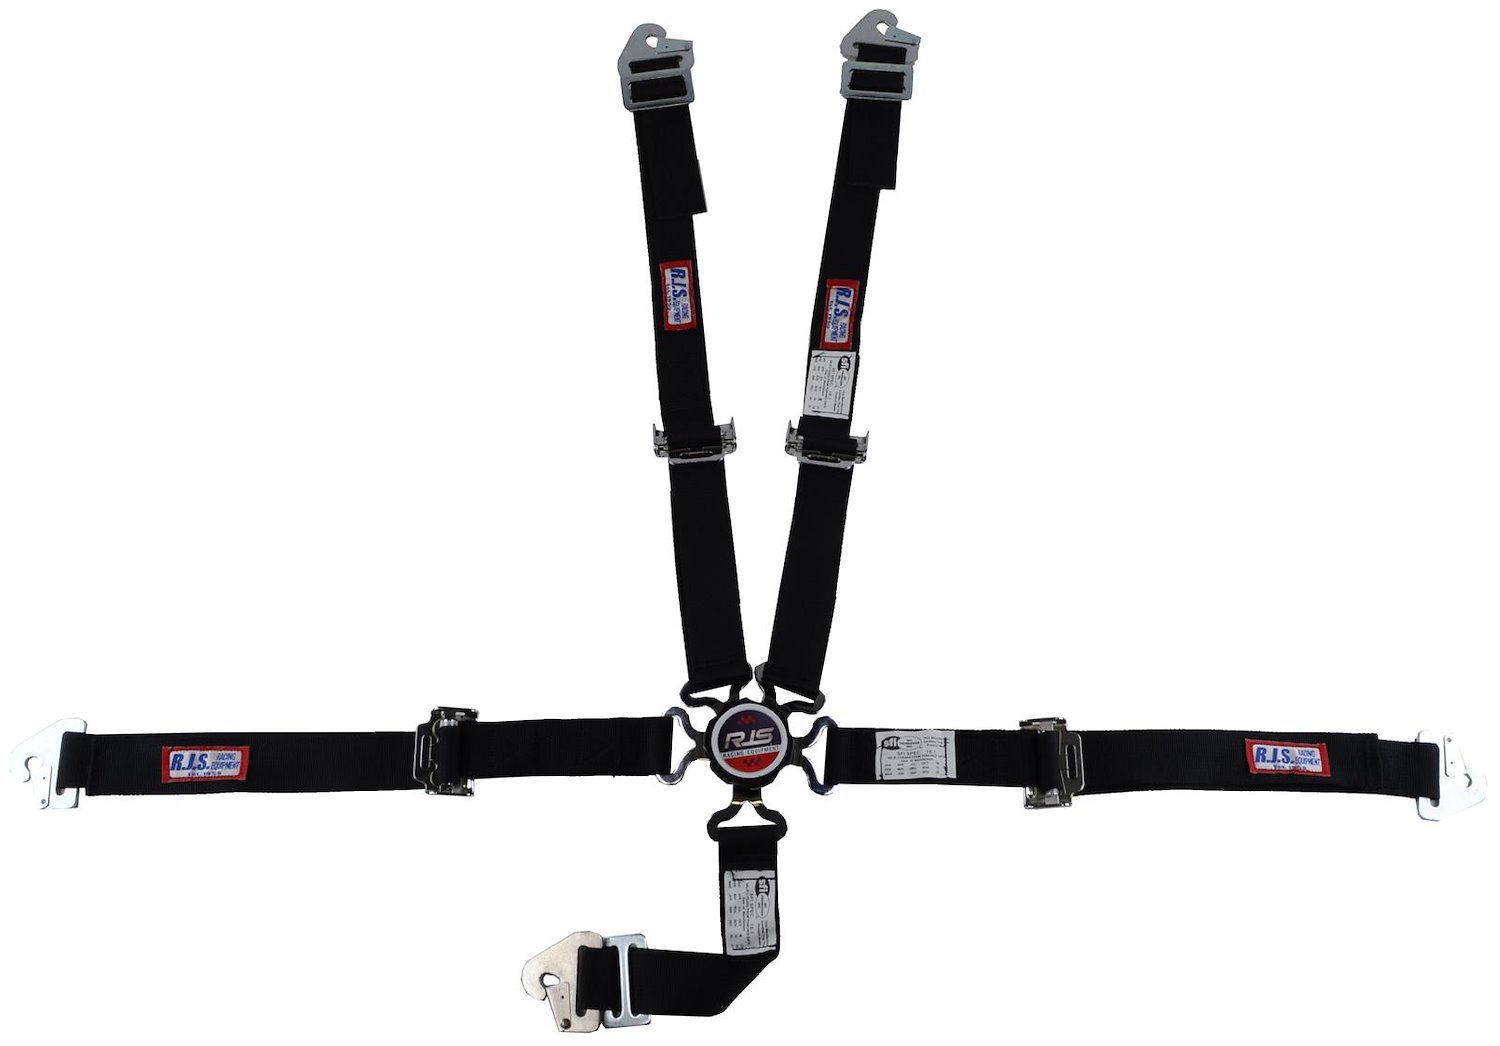 SFI 16.1 CAM-LOCK HARNESS 2 PULL UP Lap Belt 2 Shoulder Harness V ROLL BAR Mount 2 DOUBLE Sub ALL SNAP ENDS YELLOW